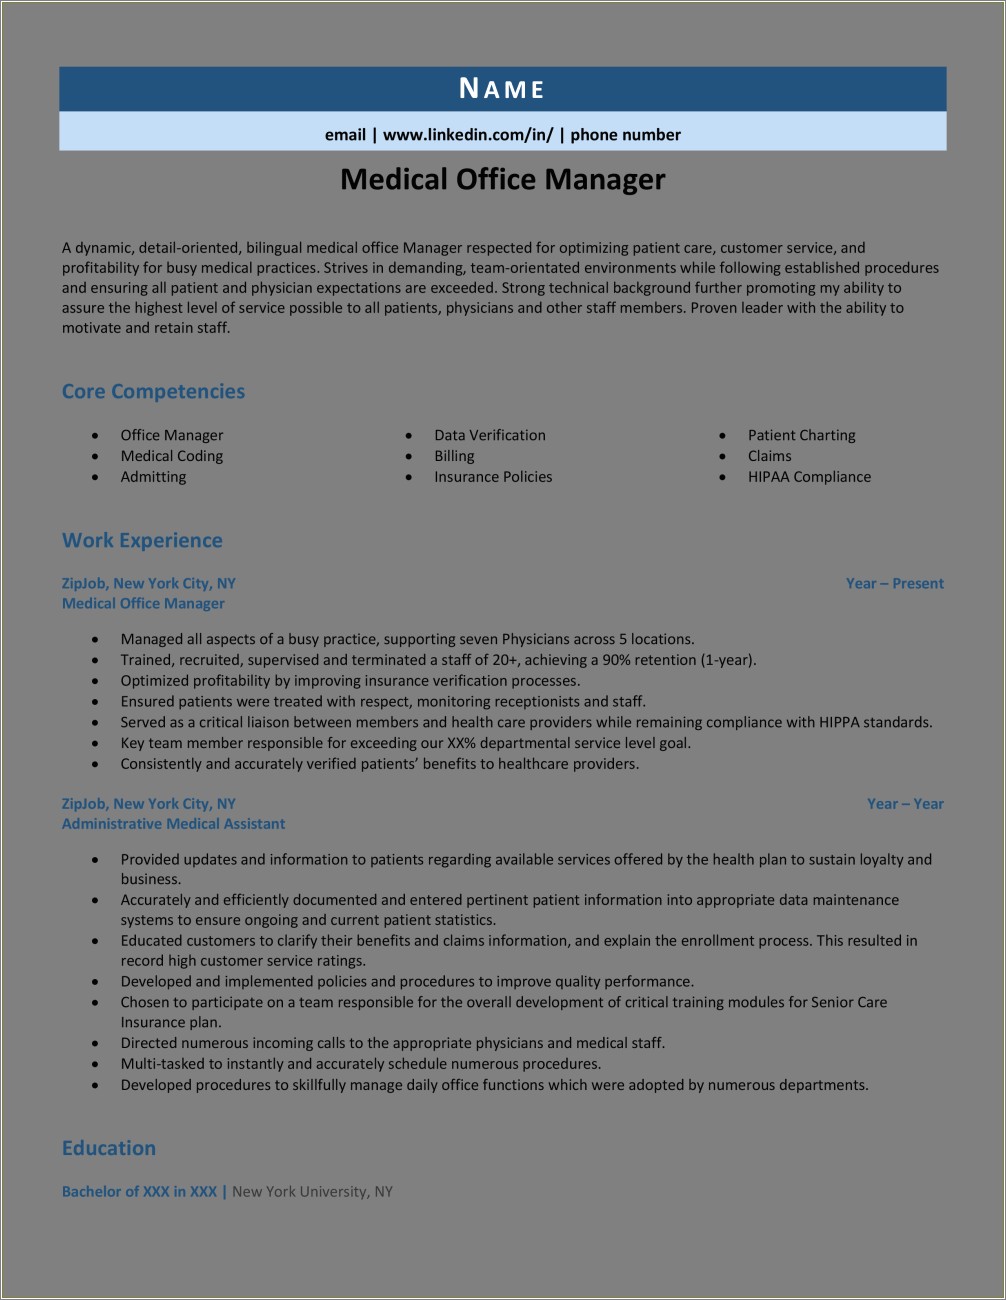 Resume Objectives For Medical Office Manager